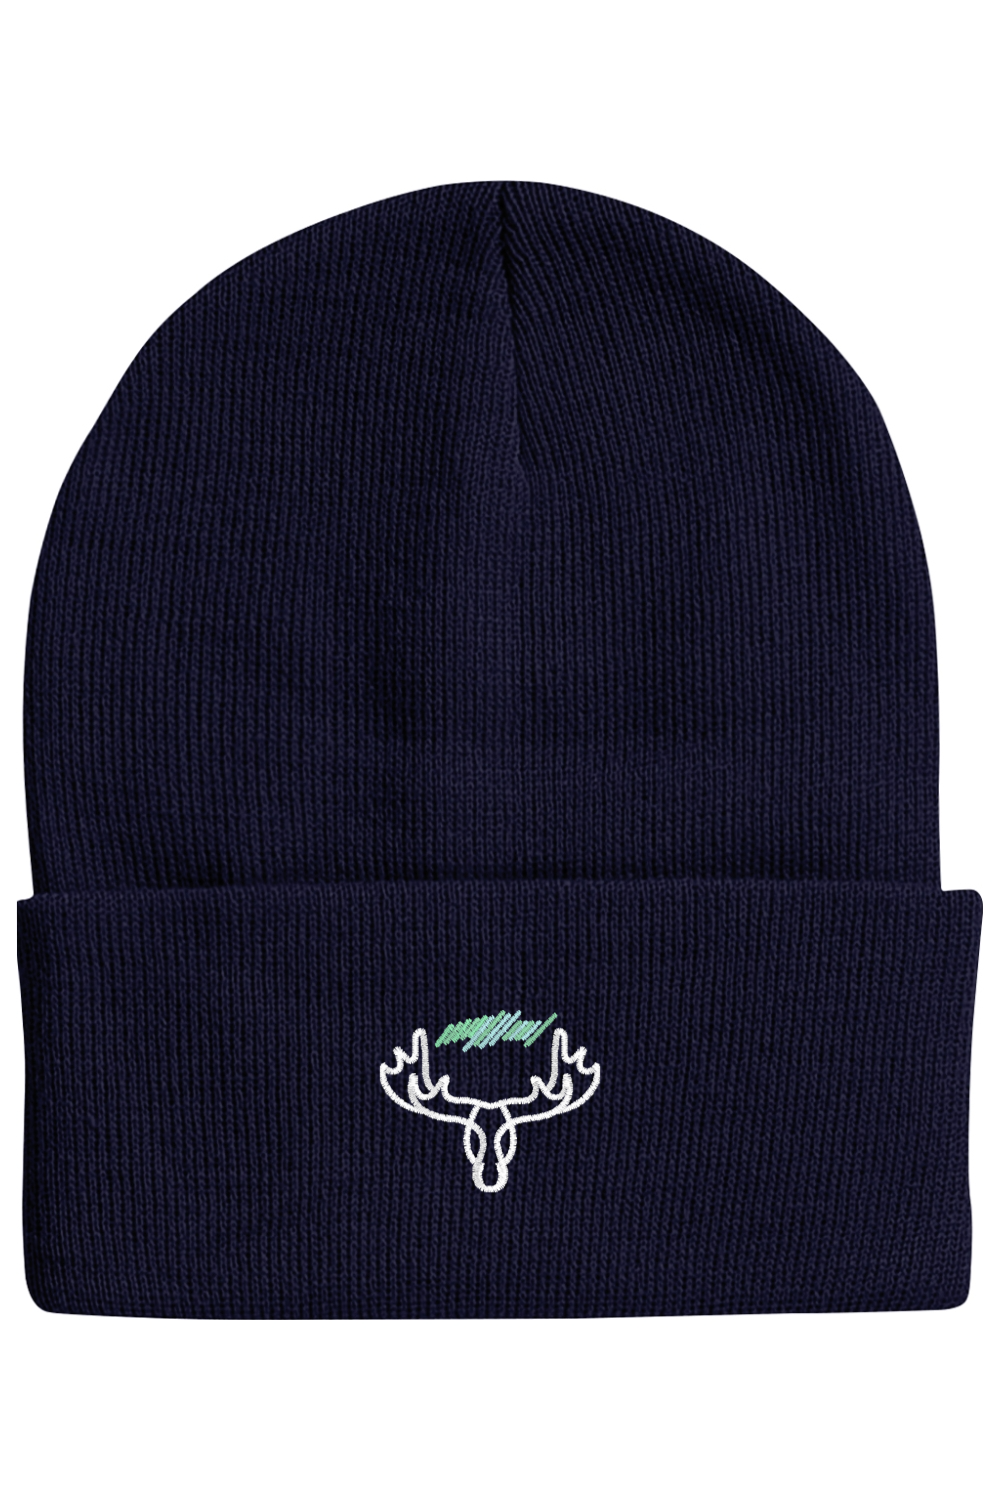 'The Legends' Beanie